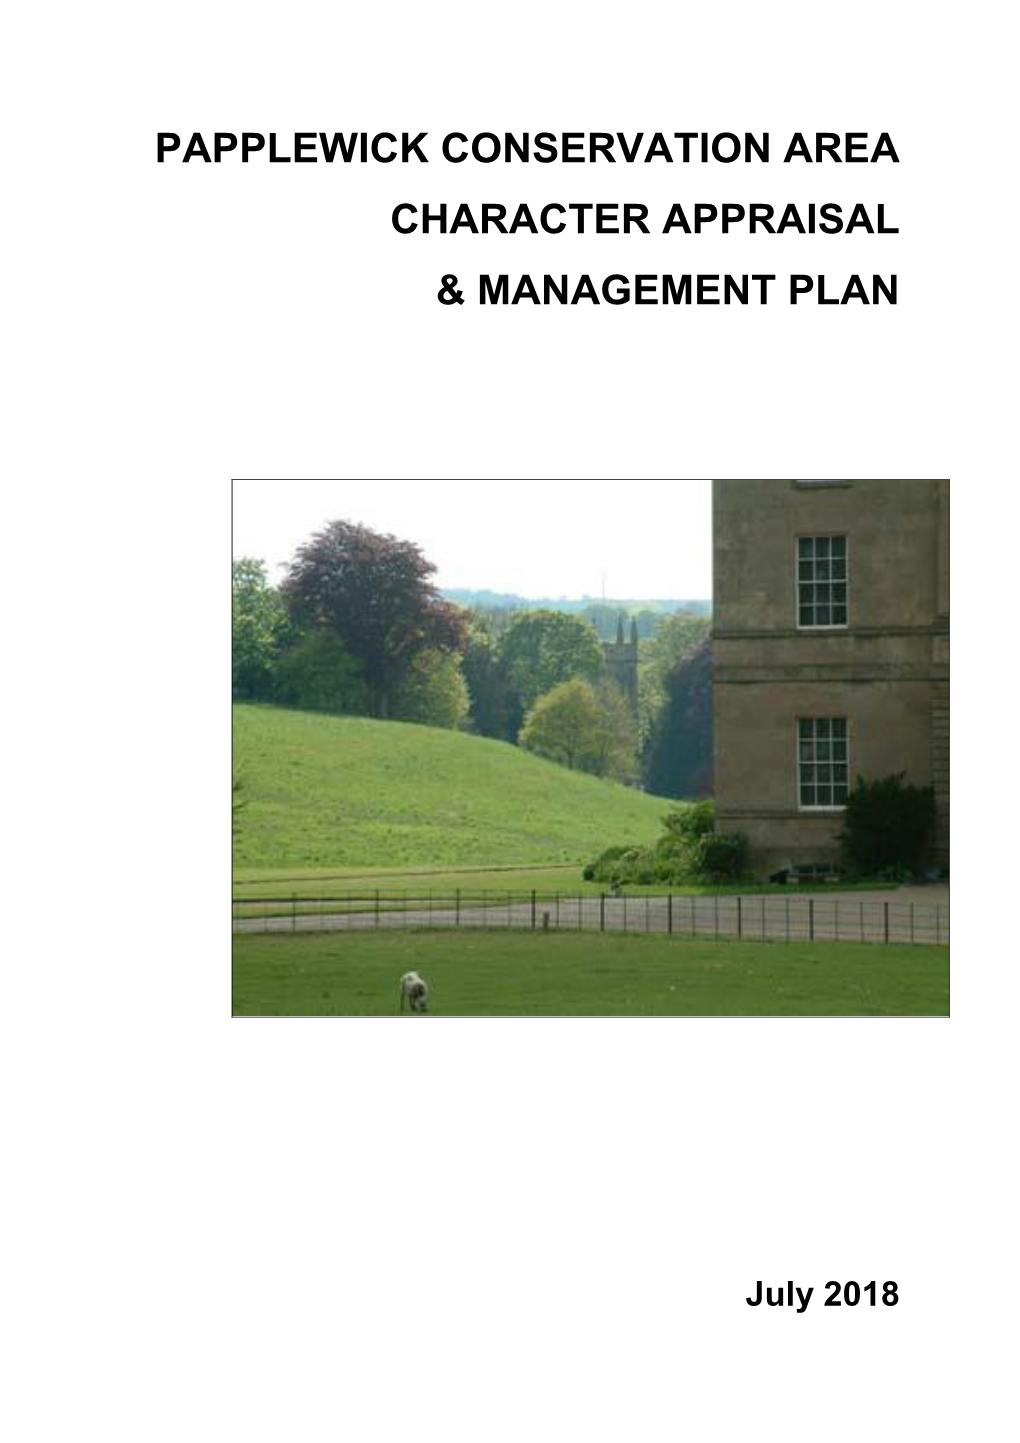 Papplewick Conservation Area Character Appraisal & Management Plan